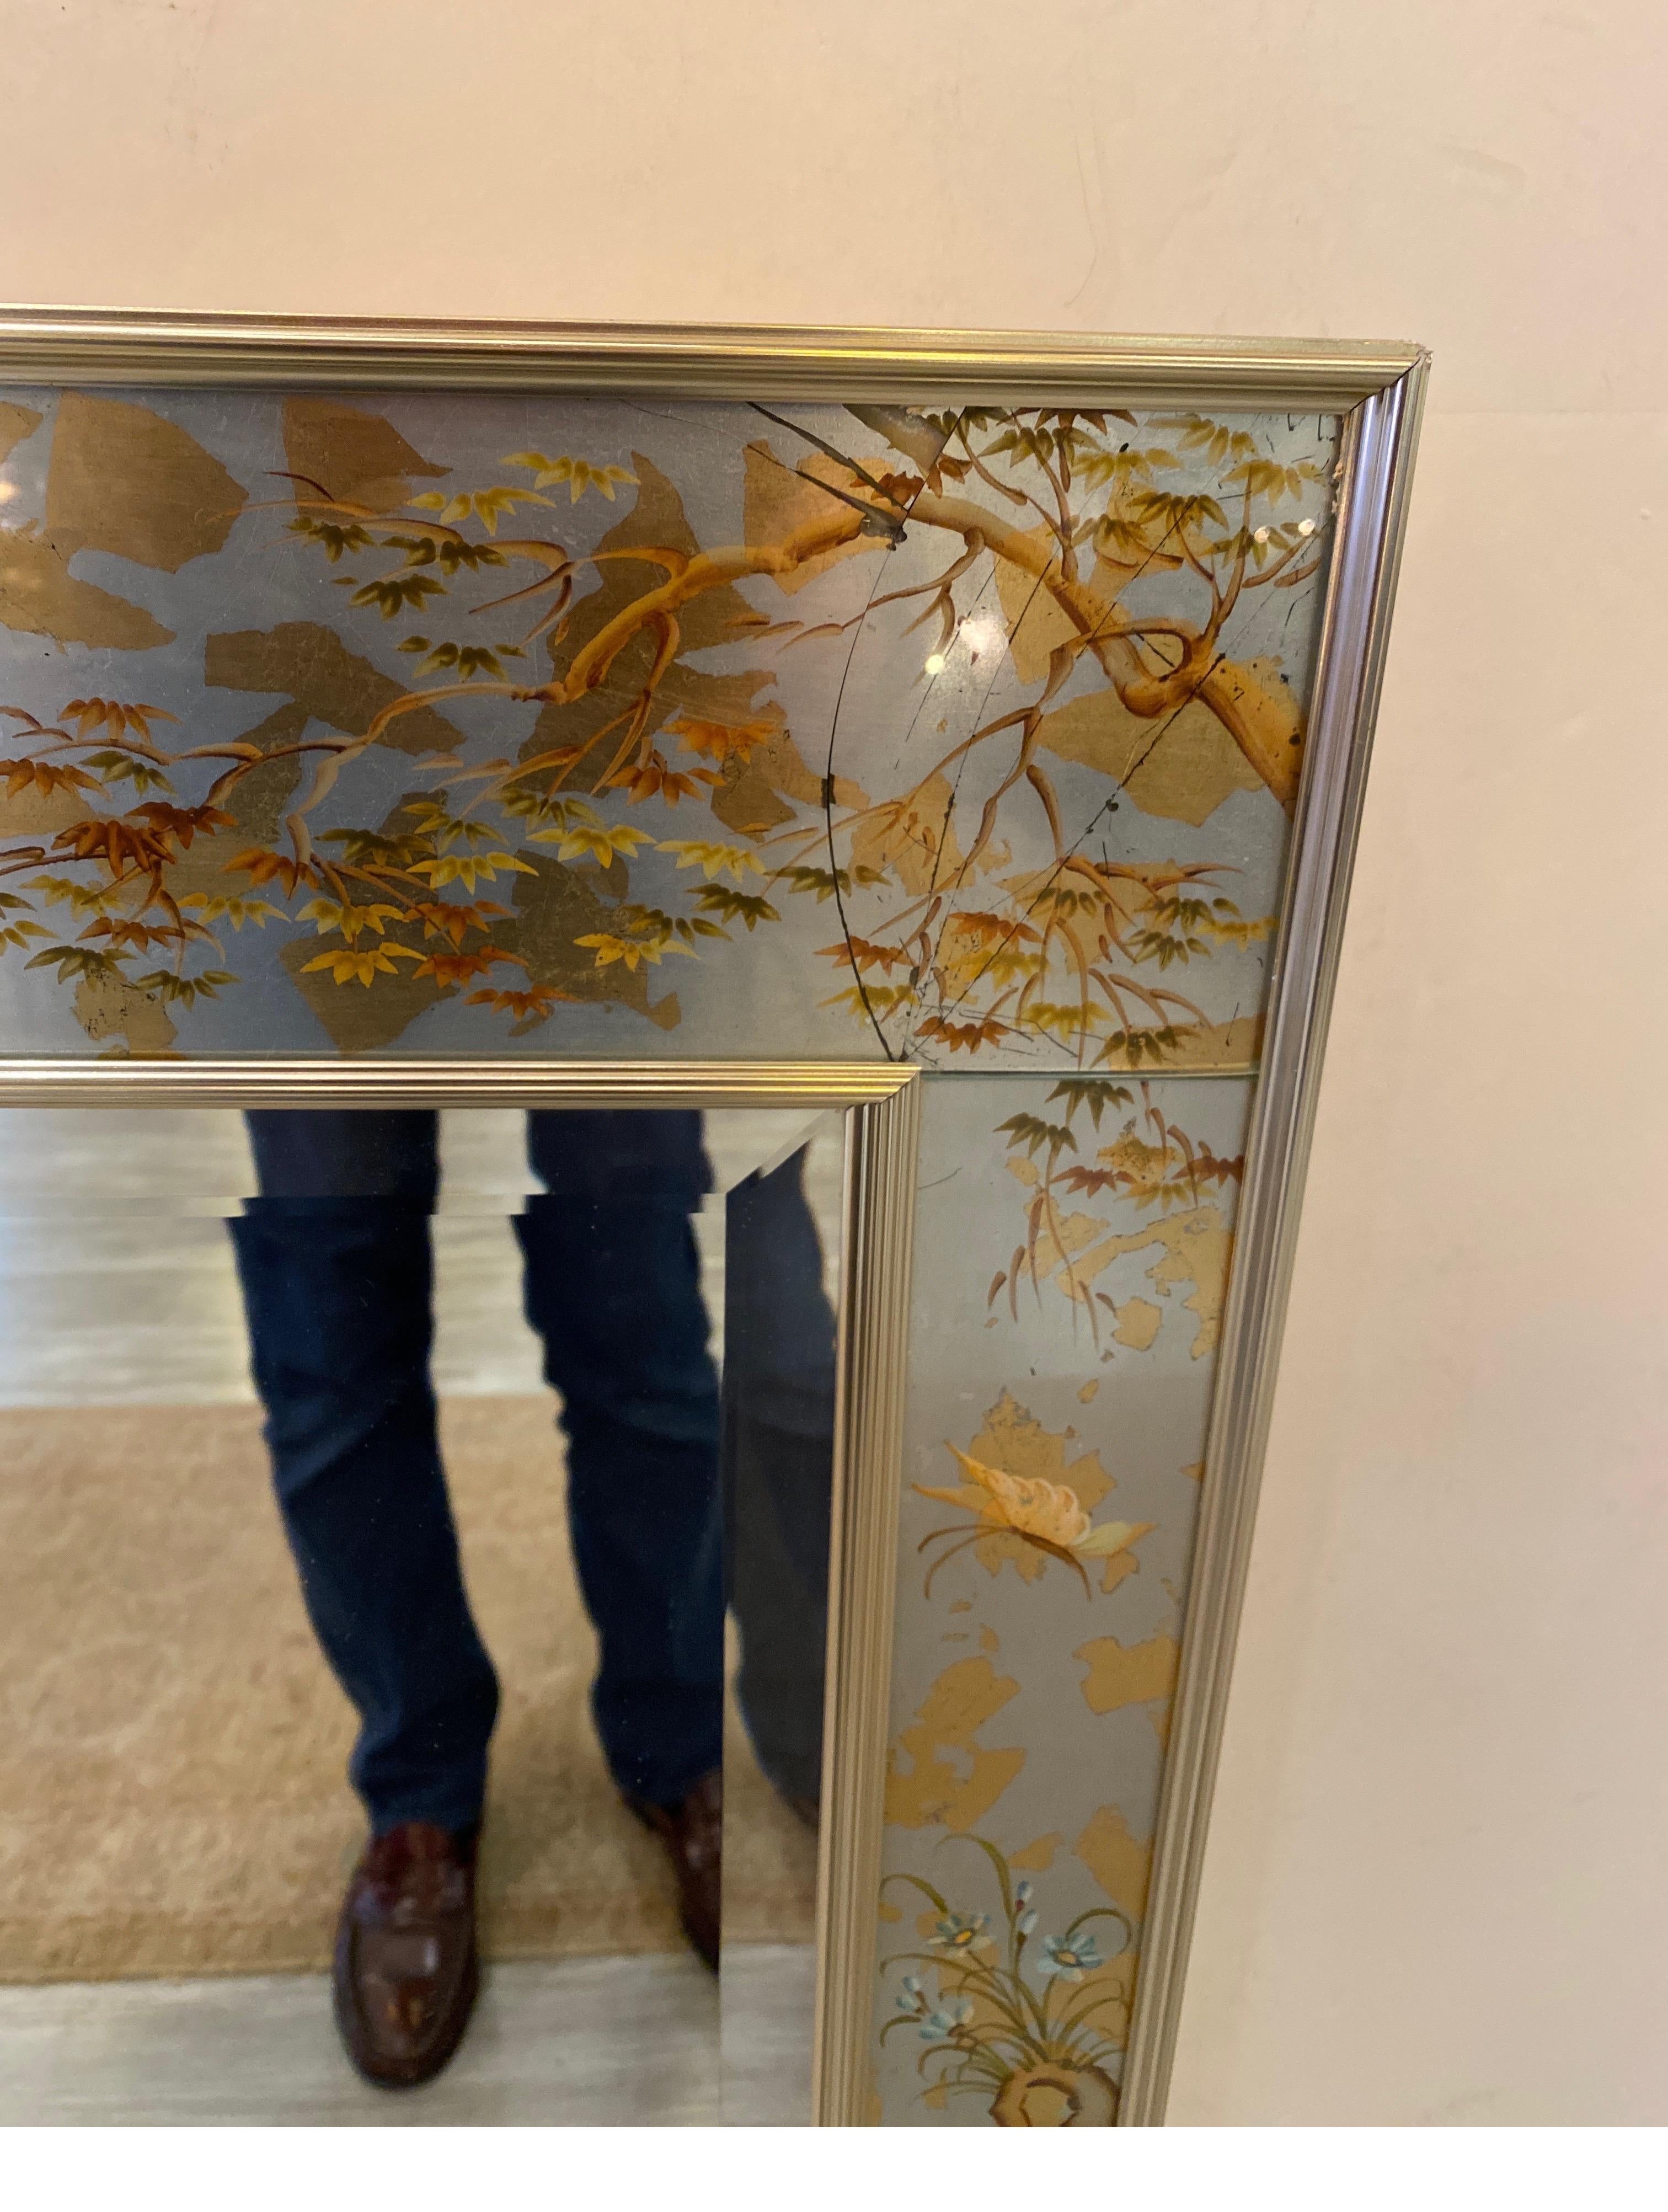 A hand painted reverse painted LaBarge mirror, in a silver and gold eglomise frame with beveled mirror, signed by the artist in the lover corner, dated 1979. Spectacular detail in excellent condition. Nice large size. 
Measure: 42.5 High by 38.5